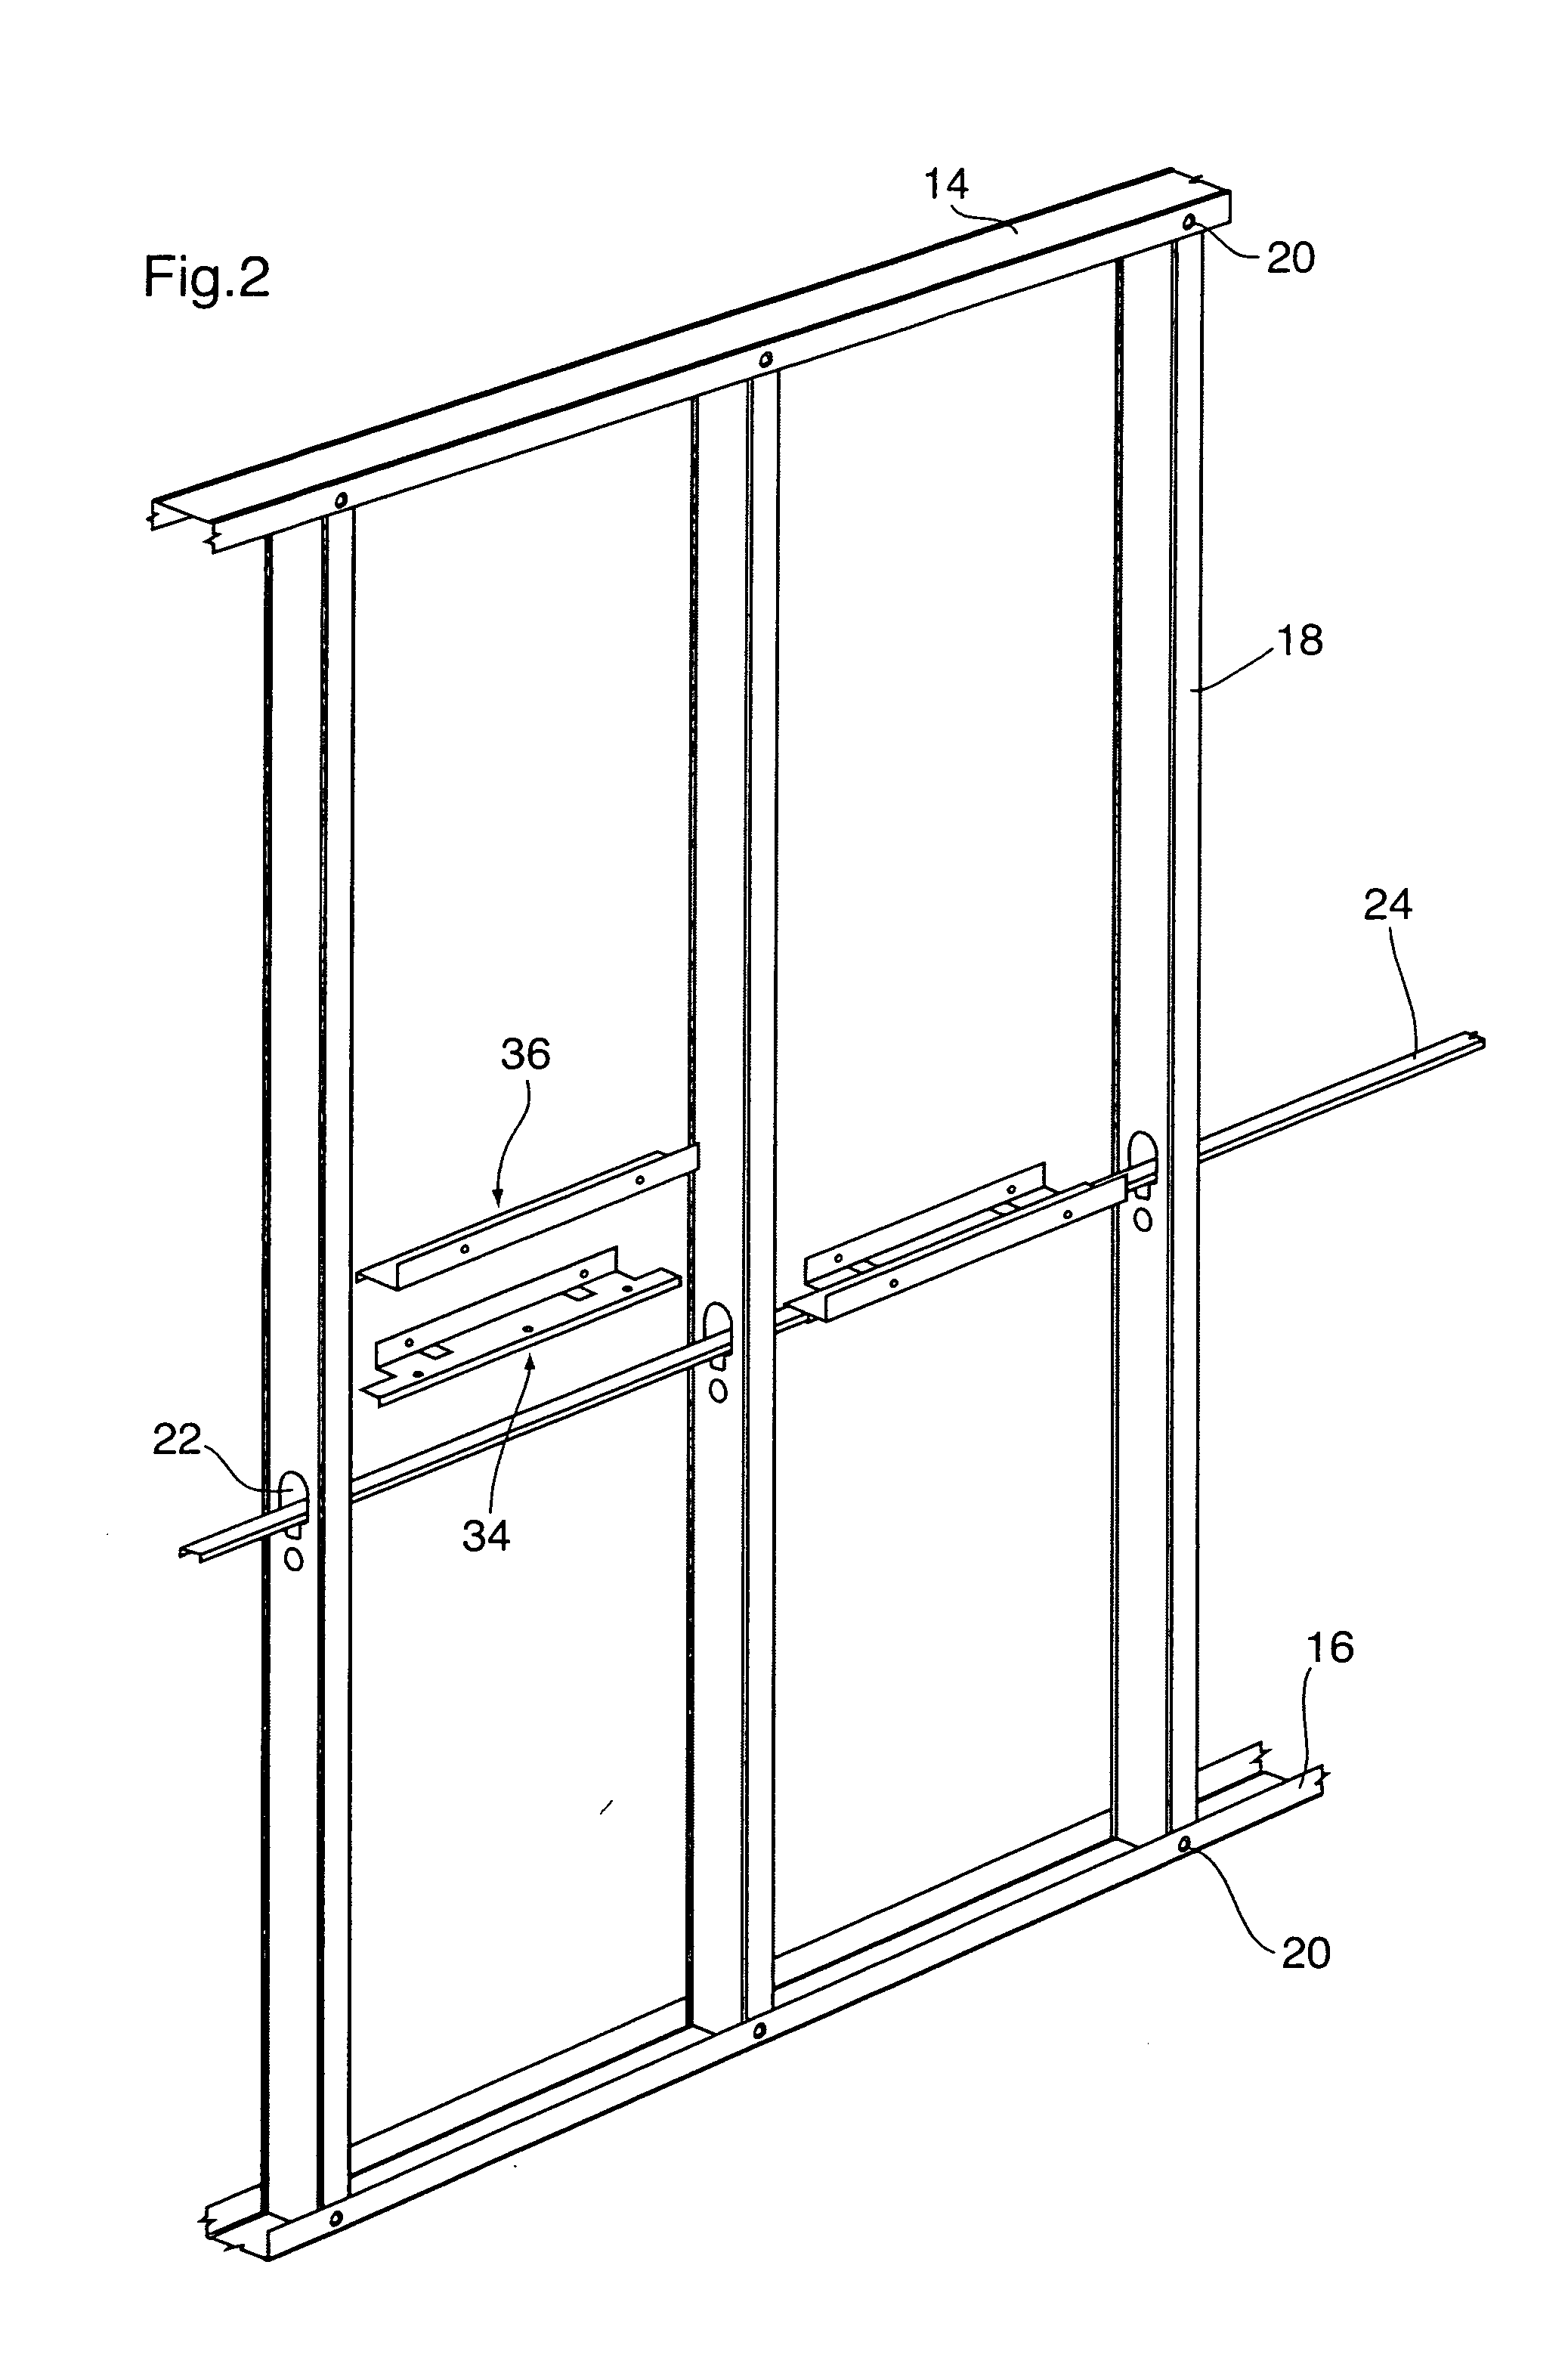 Load supporting blocking member for use in a metal stud wall